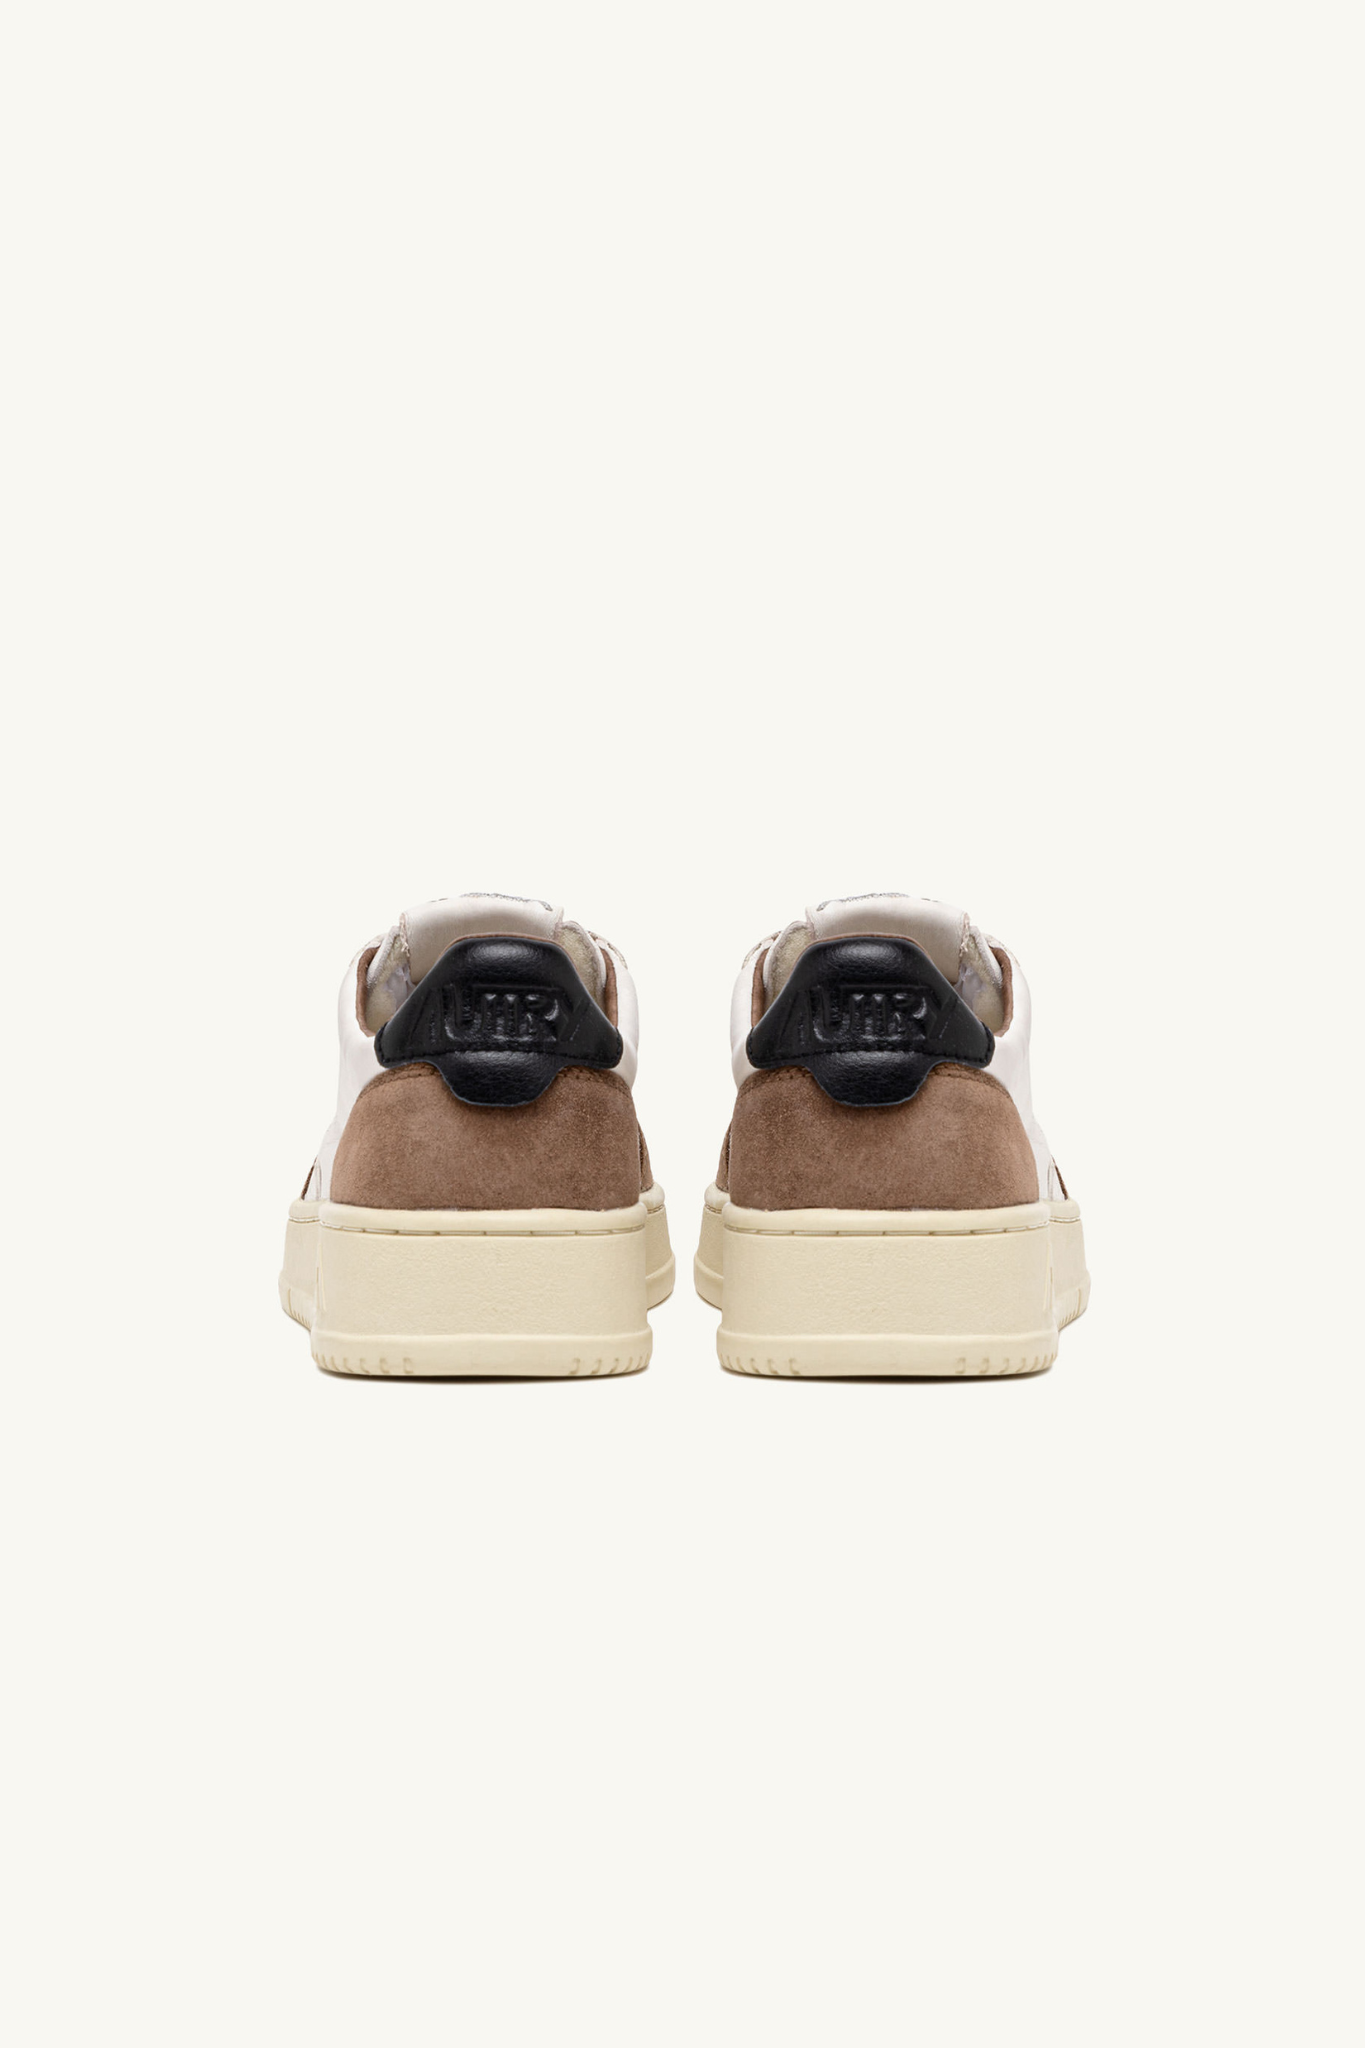 AULW-GS21 - MEDALIST LOW SNEAKERS IN SUEDE POWDER AND SOFT GOATSKIN COLOR WHITE AND BROWN